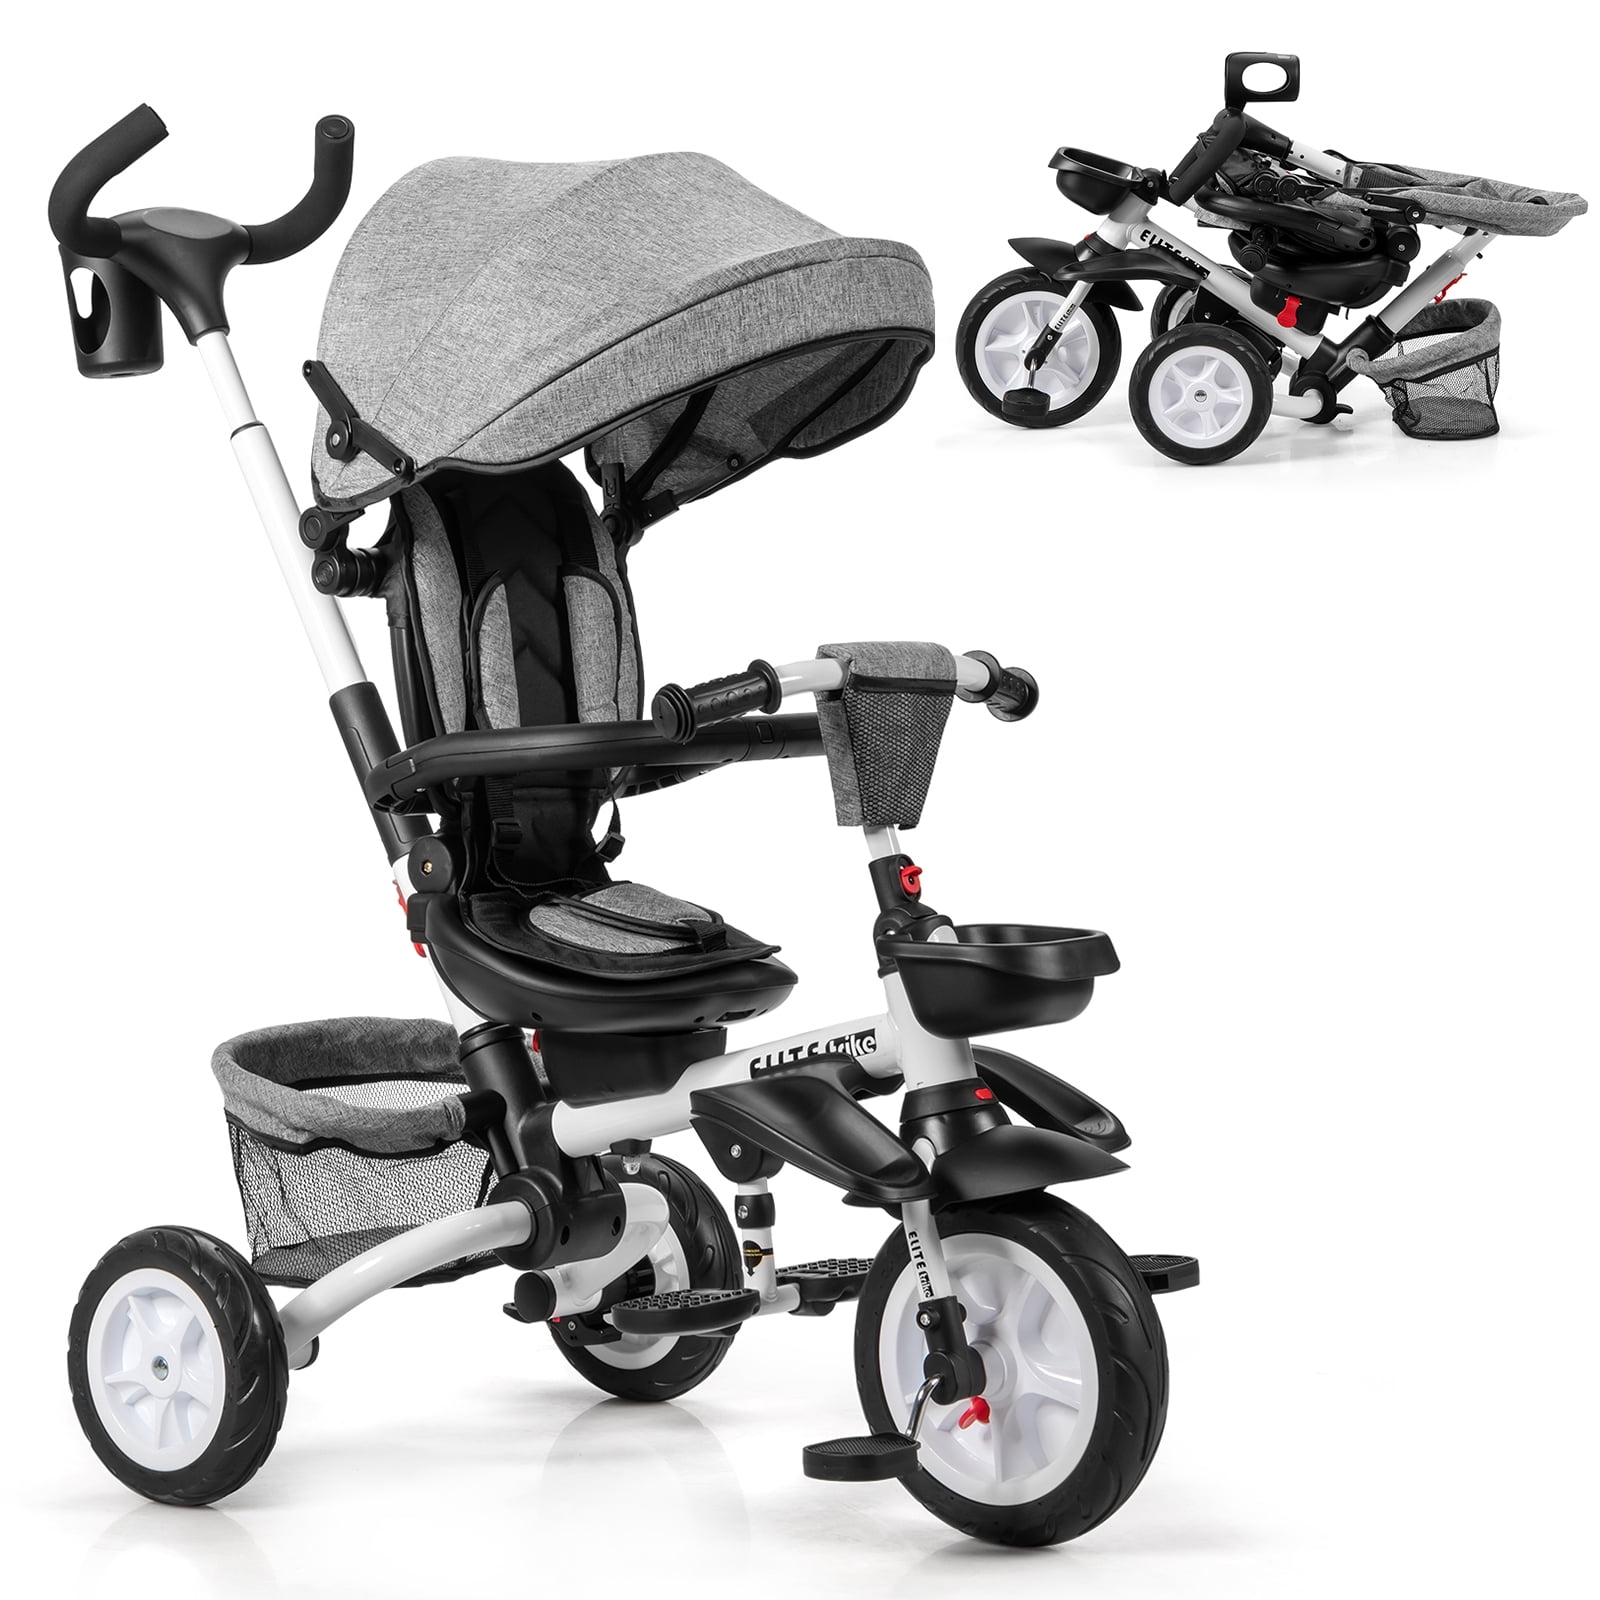 Moolo Kids Trike Tricycle Pedal 3 Wheel Children Baby Toddler with Push Handle Removable Canopy Reversible Seat Color : D